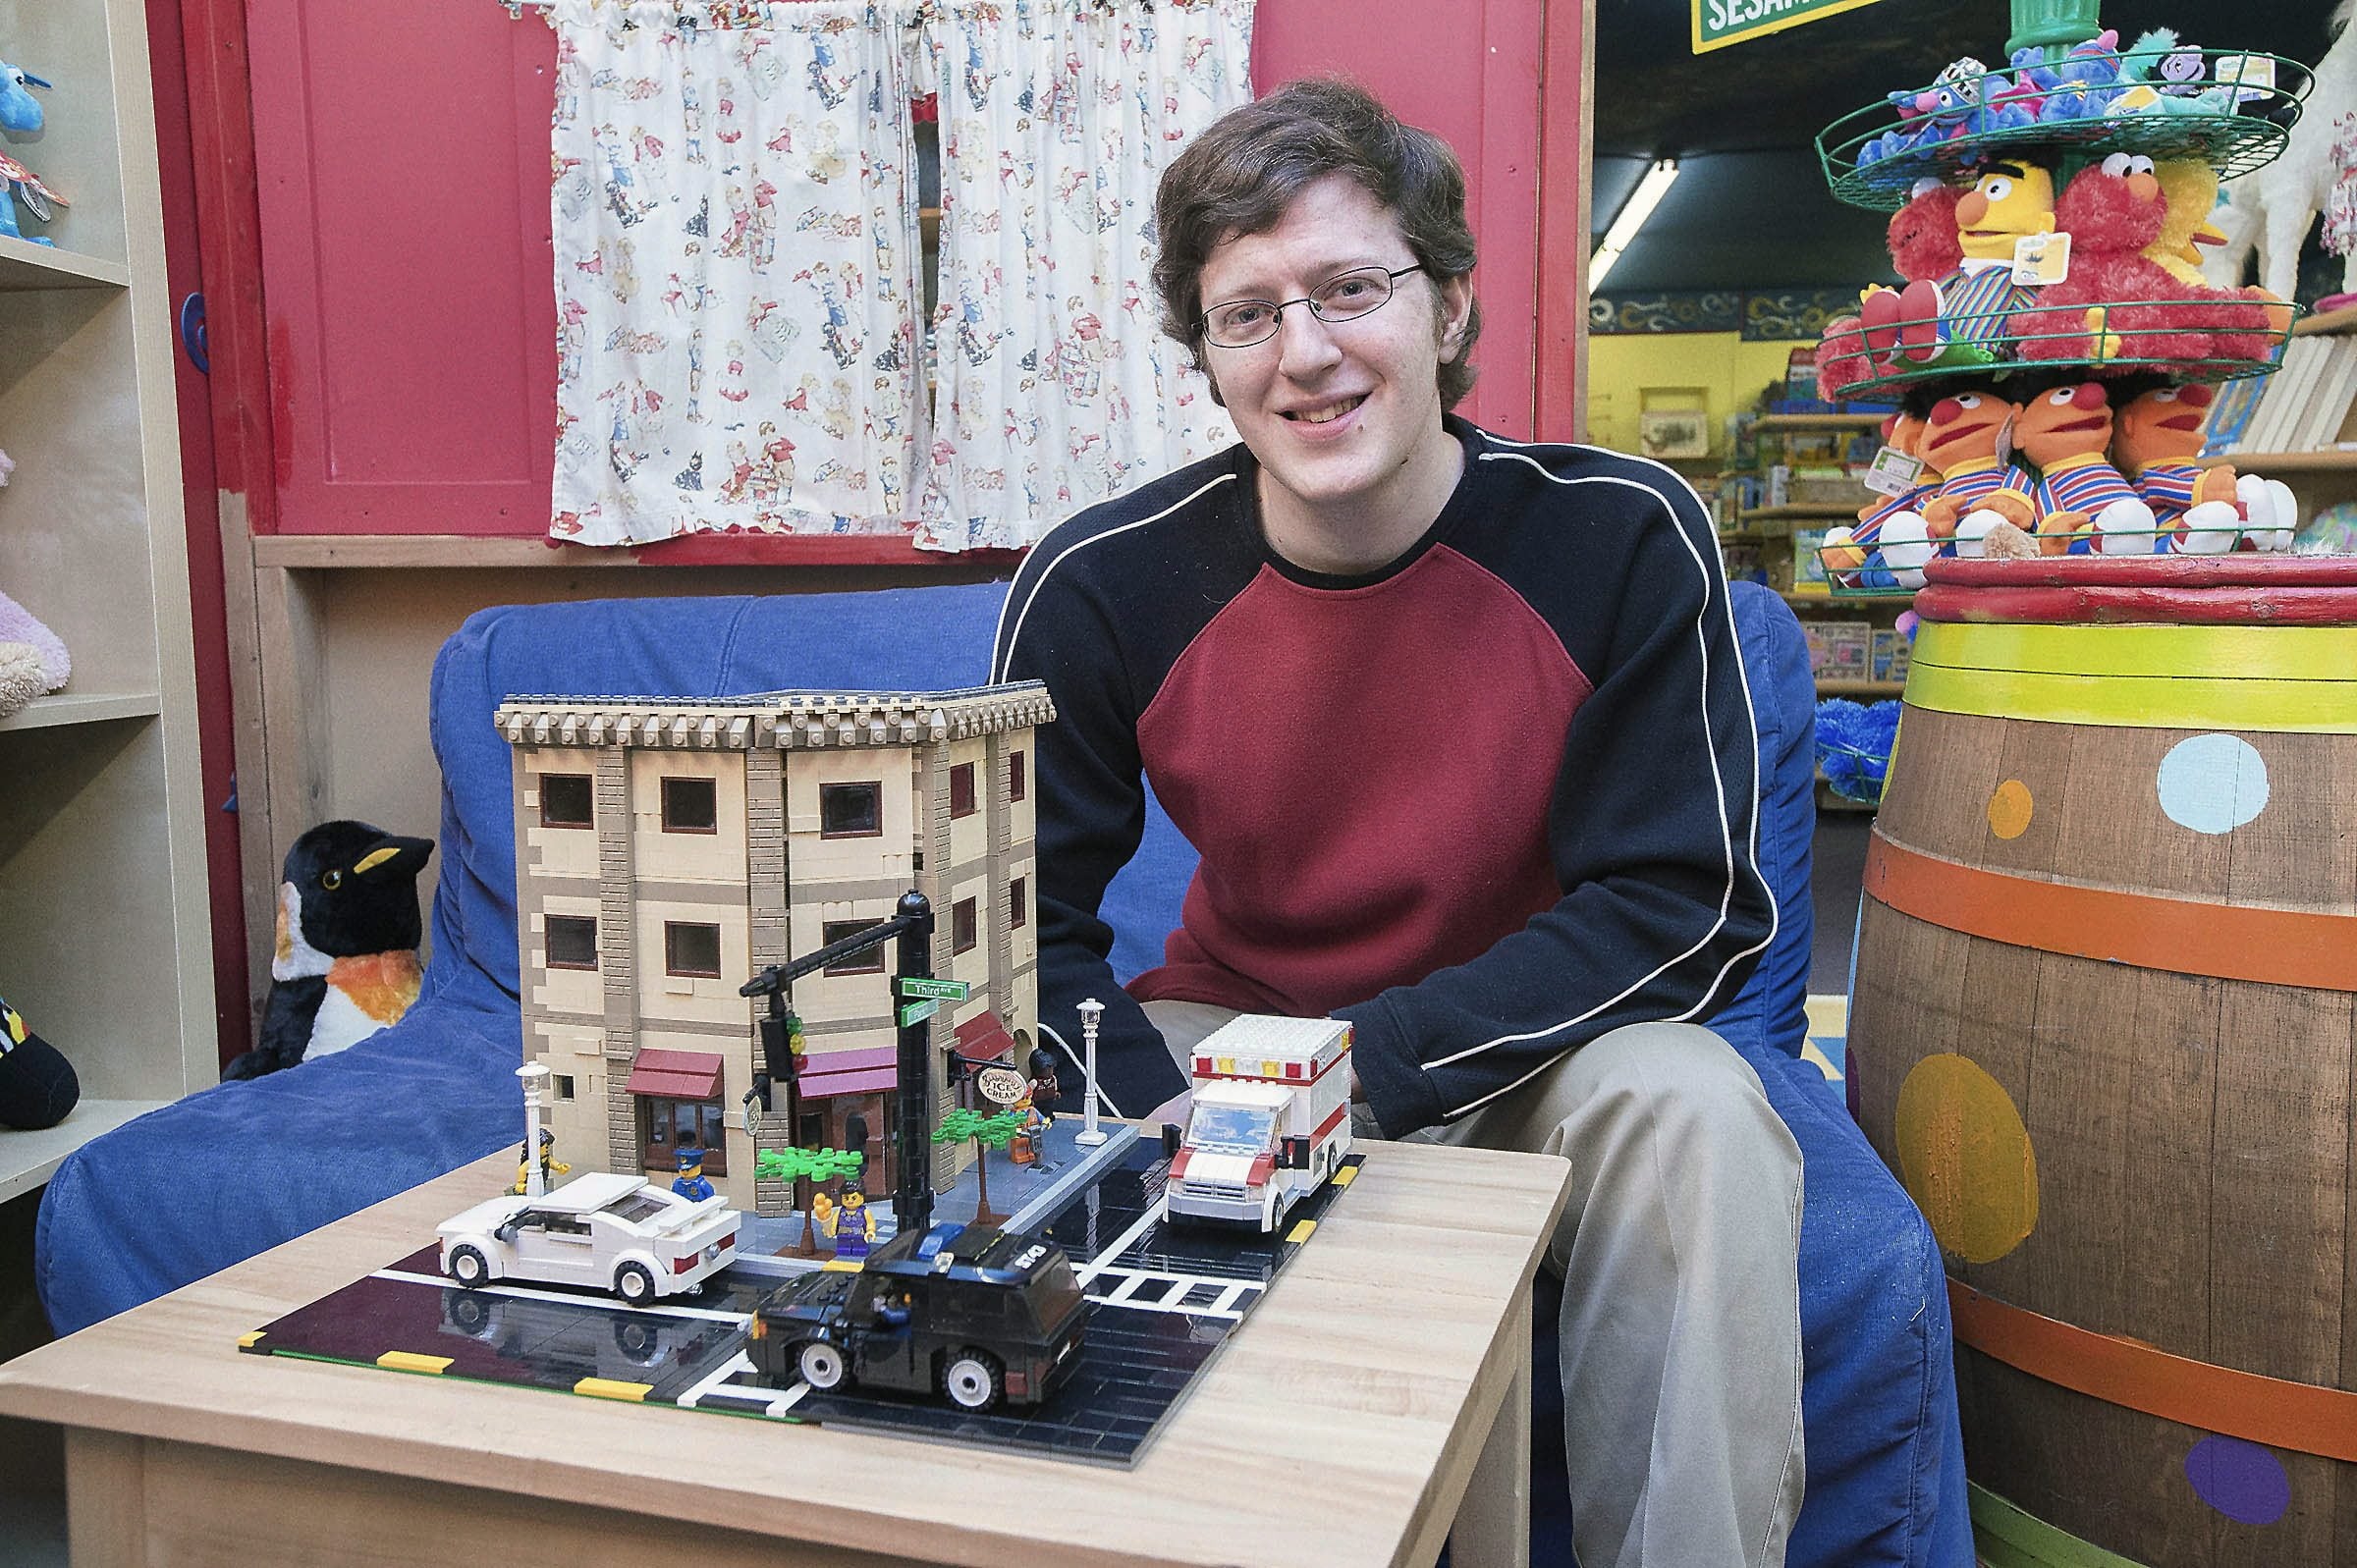 Kevin Wanner with his prize-winning Lego replica of the corner of Third and Evans streets in McMinnville, Ore.